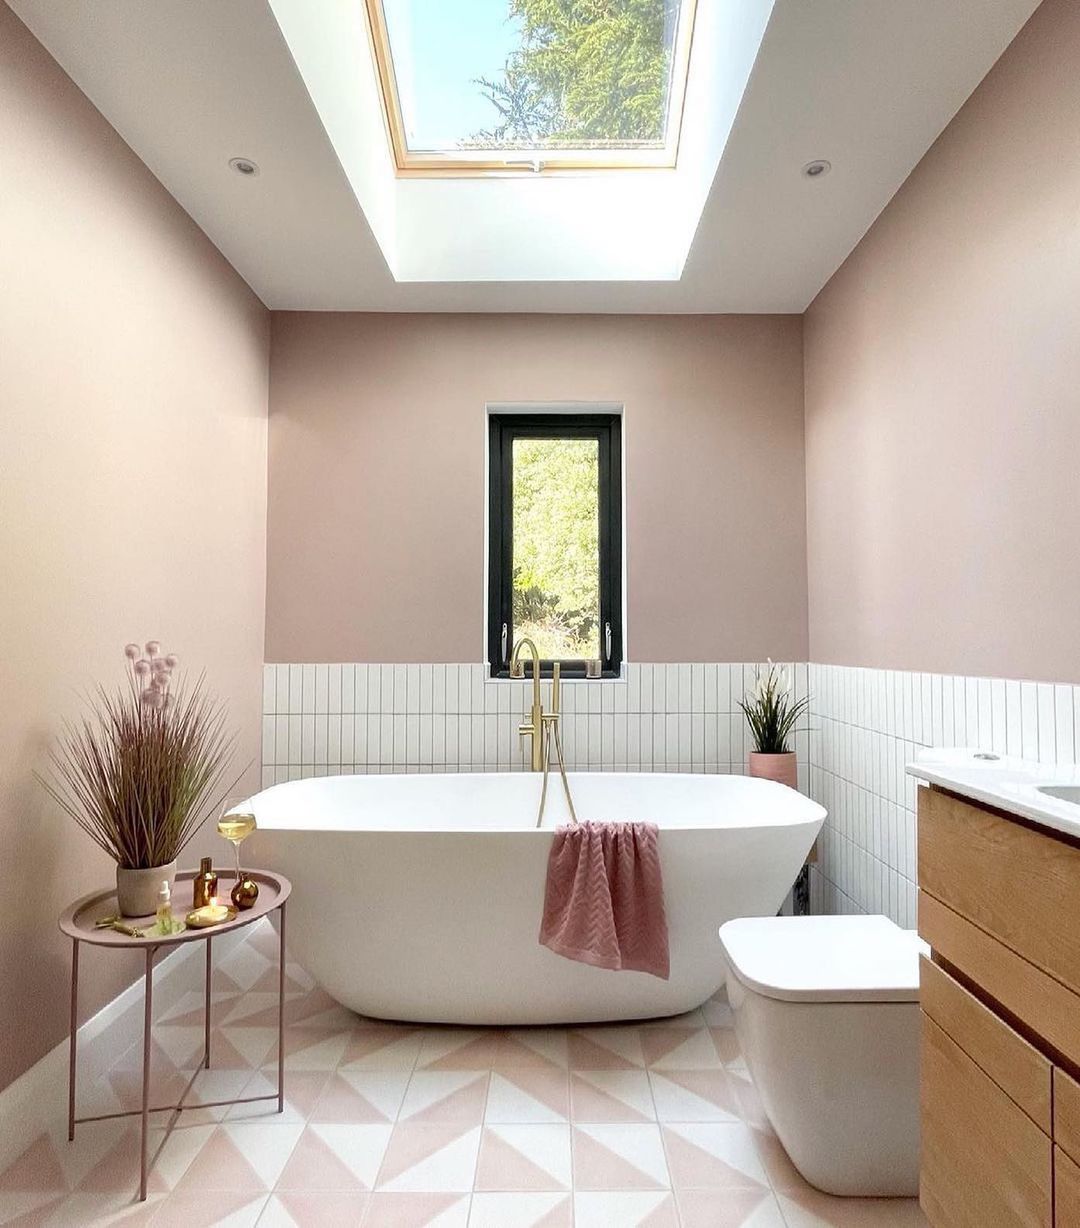 7 Big Bathroom Trends For 2023, According To The Experts